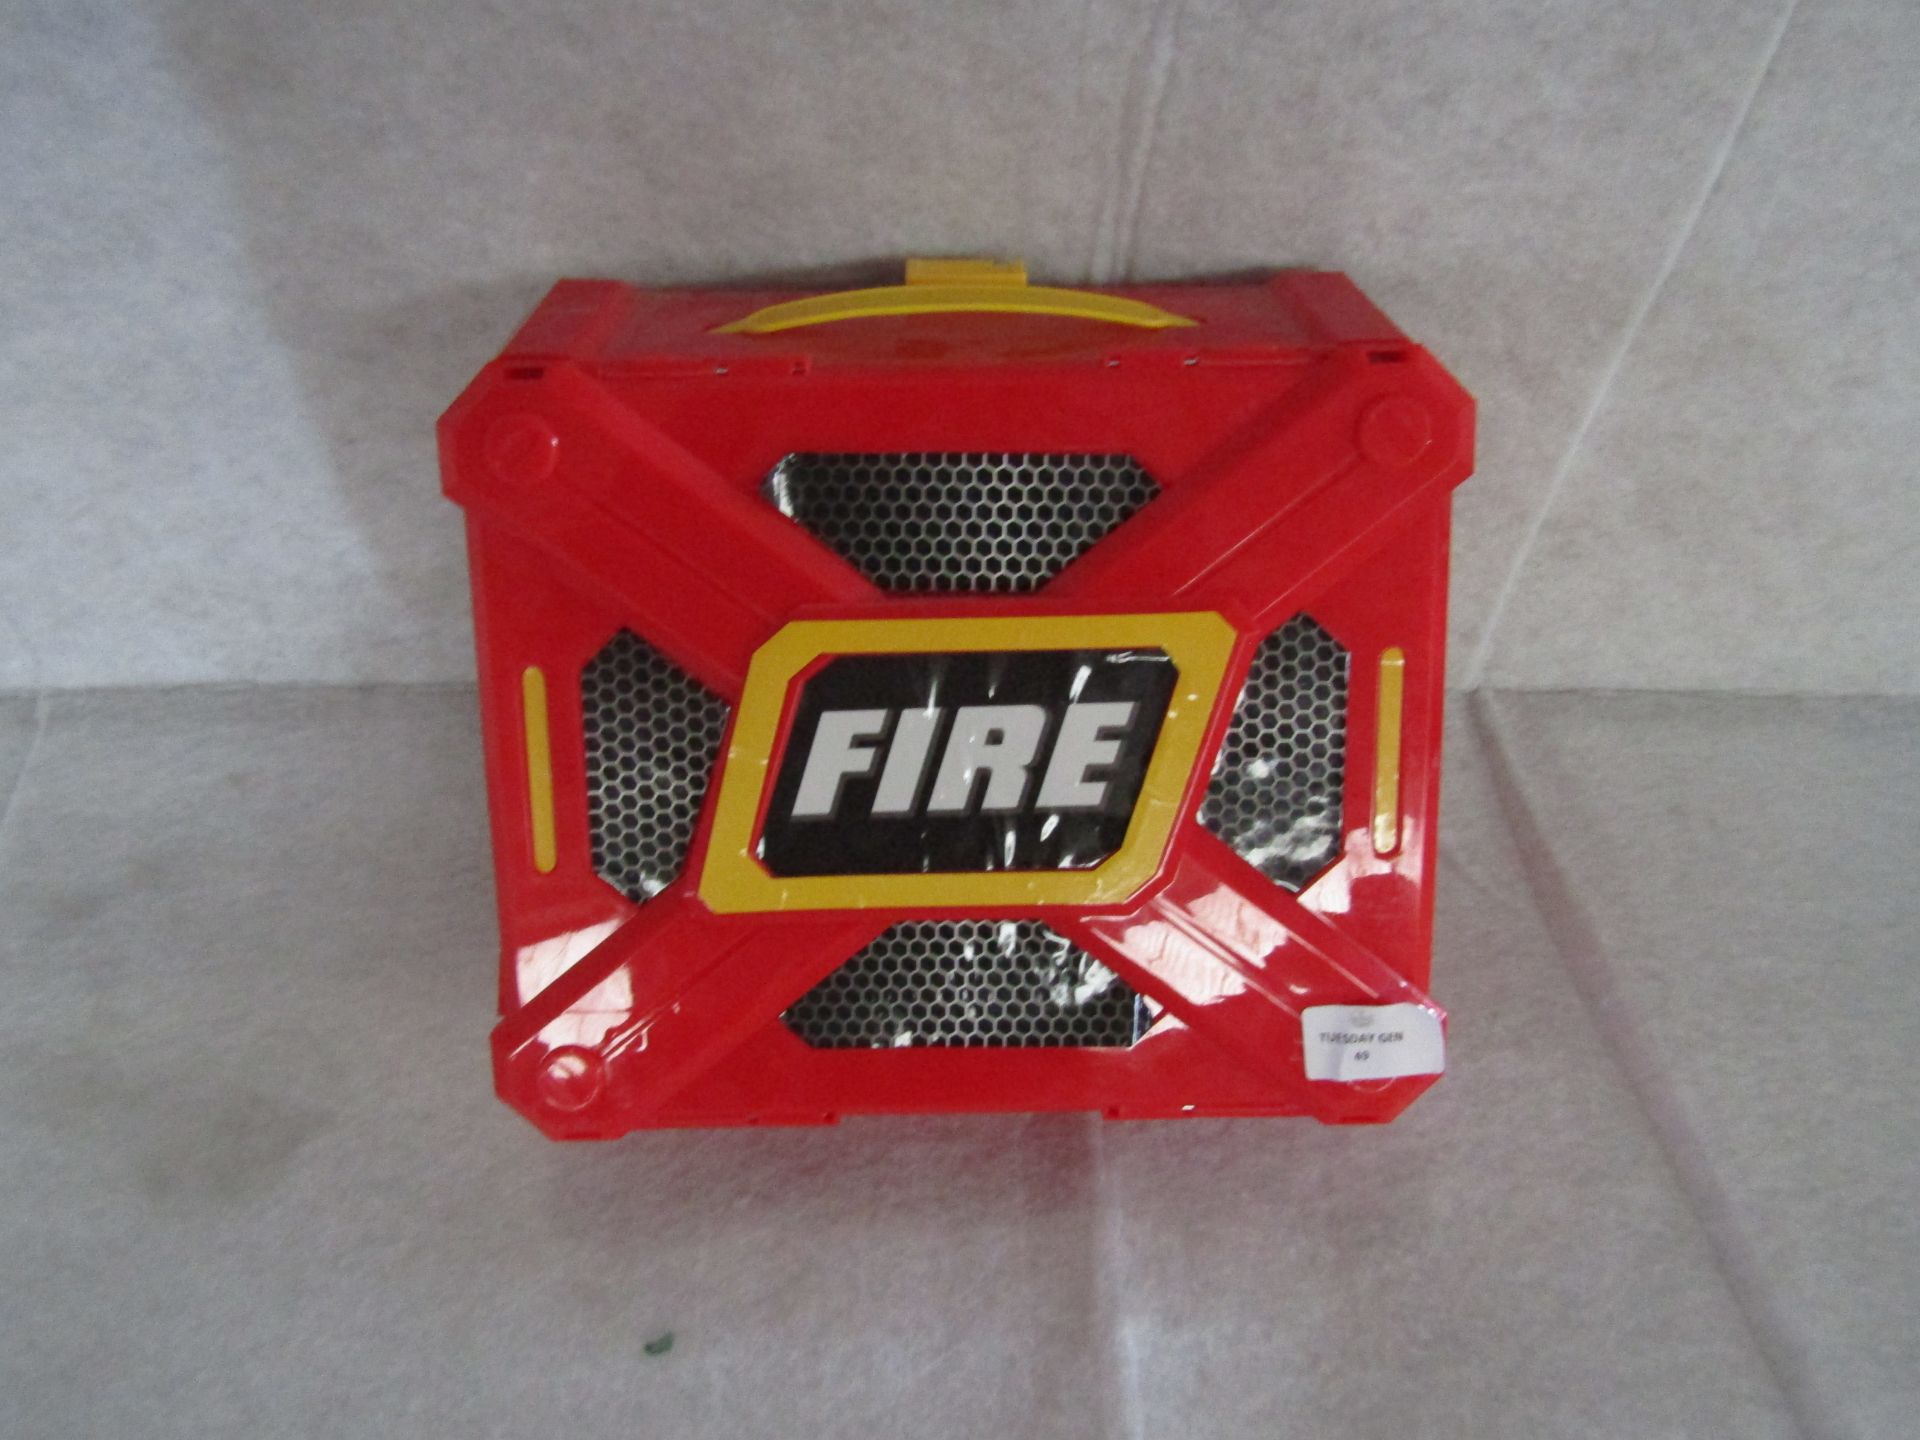 Fire Station Playcase - Good Condition.